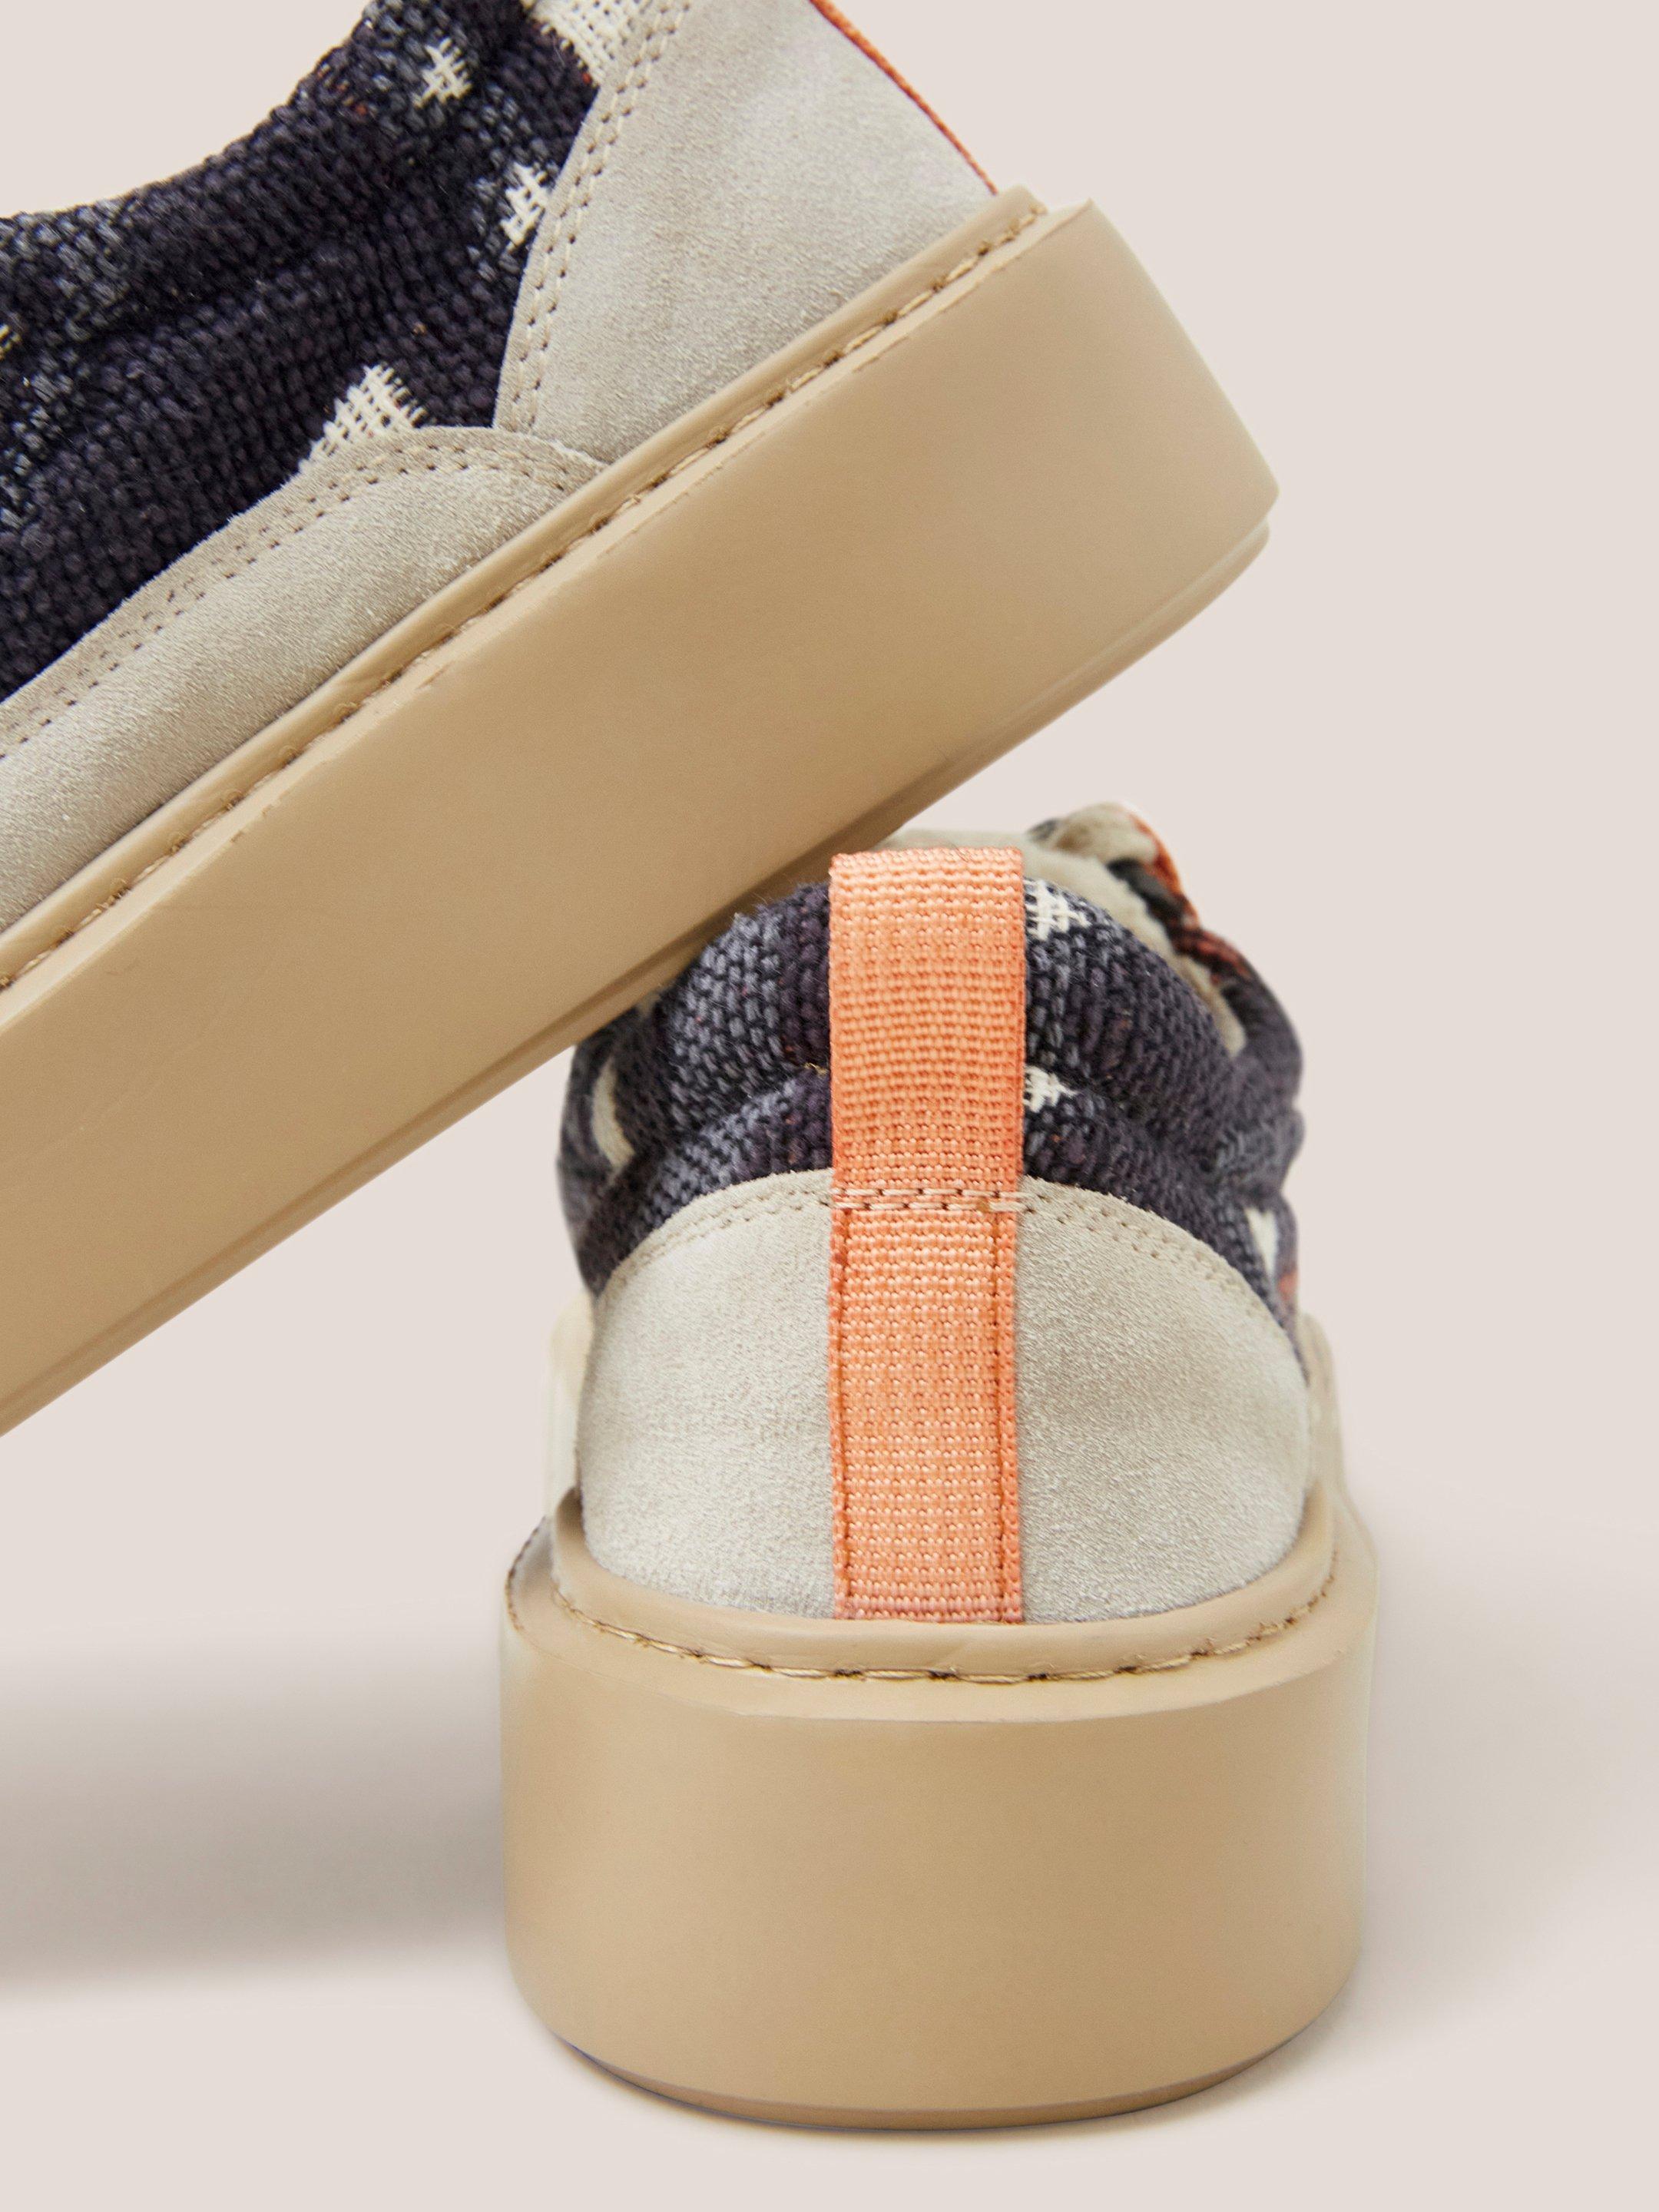 XL Extralight Suede Trainer in NAVY MULTI - FLAT DETAIL